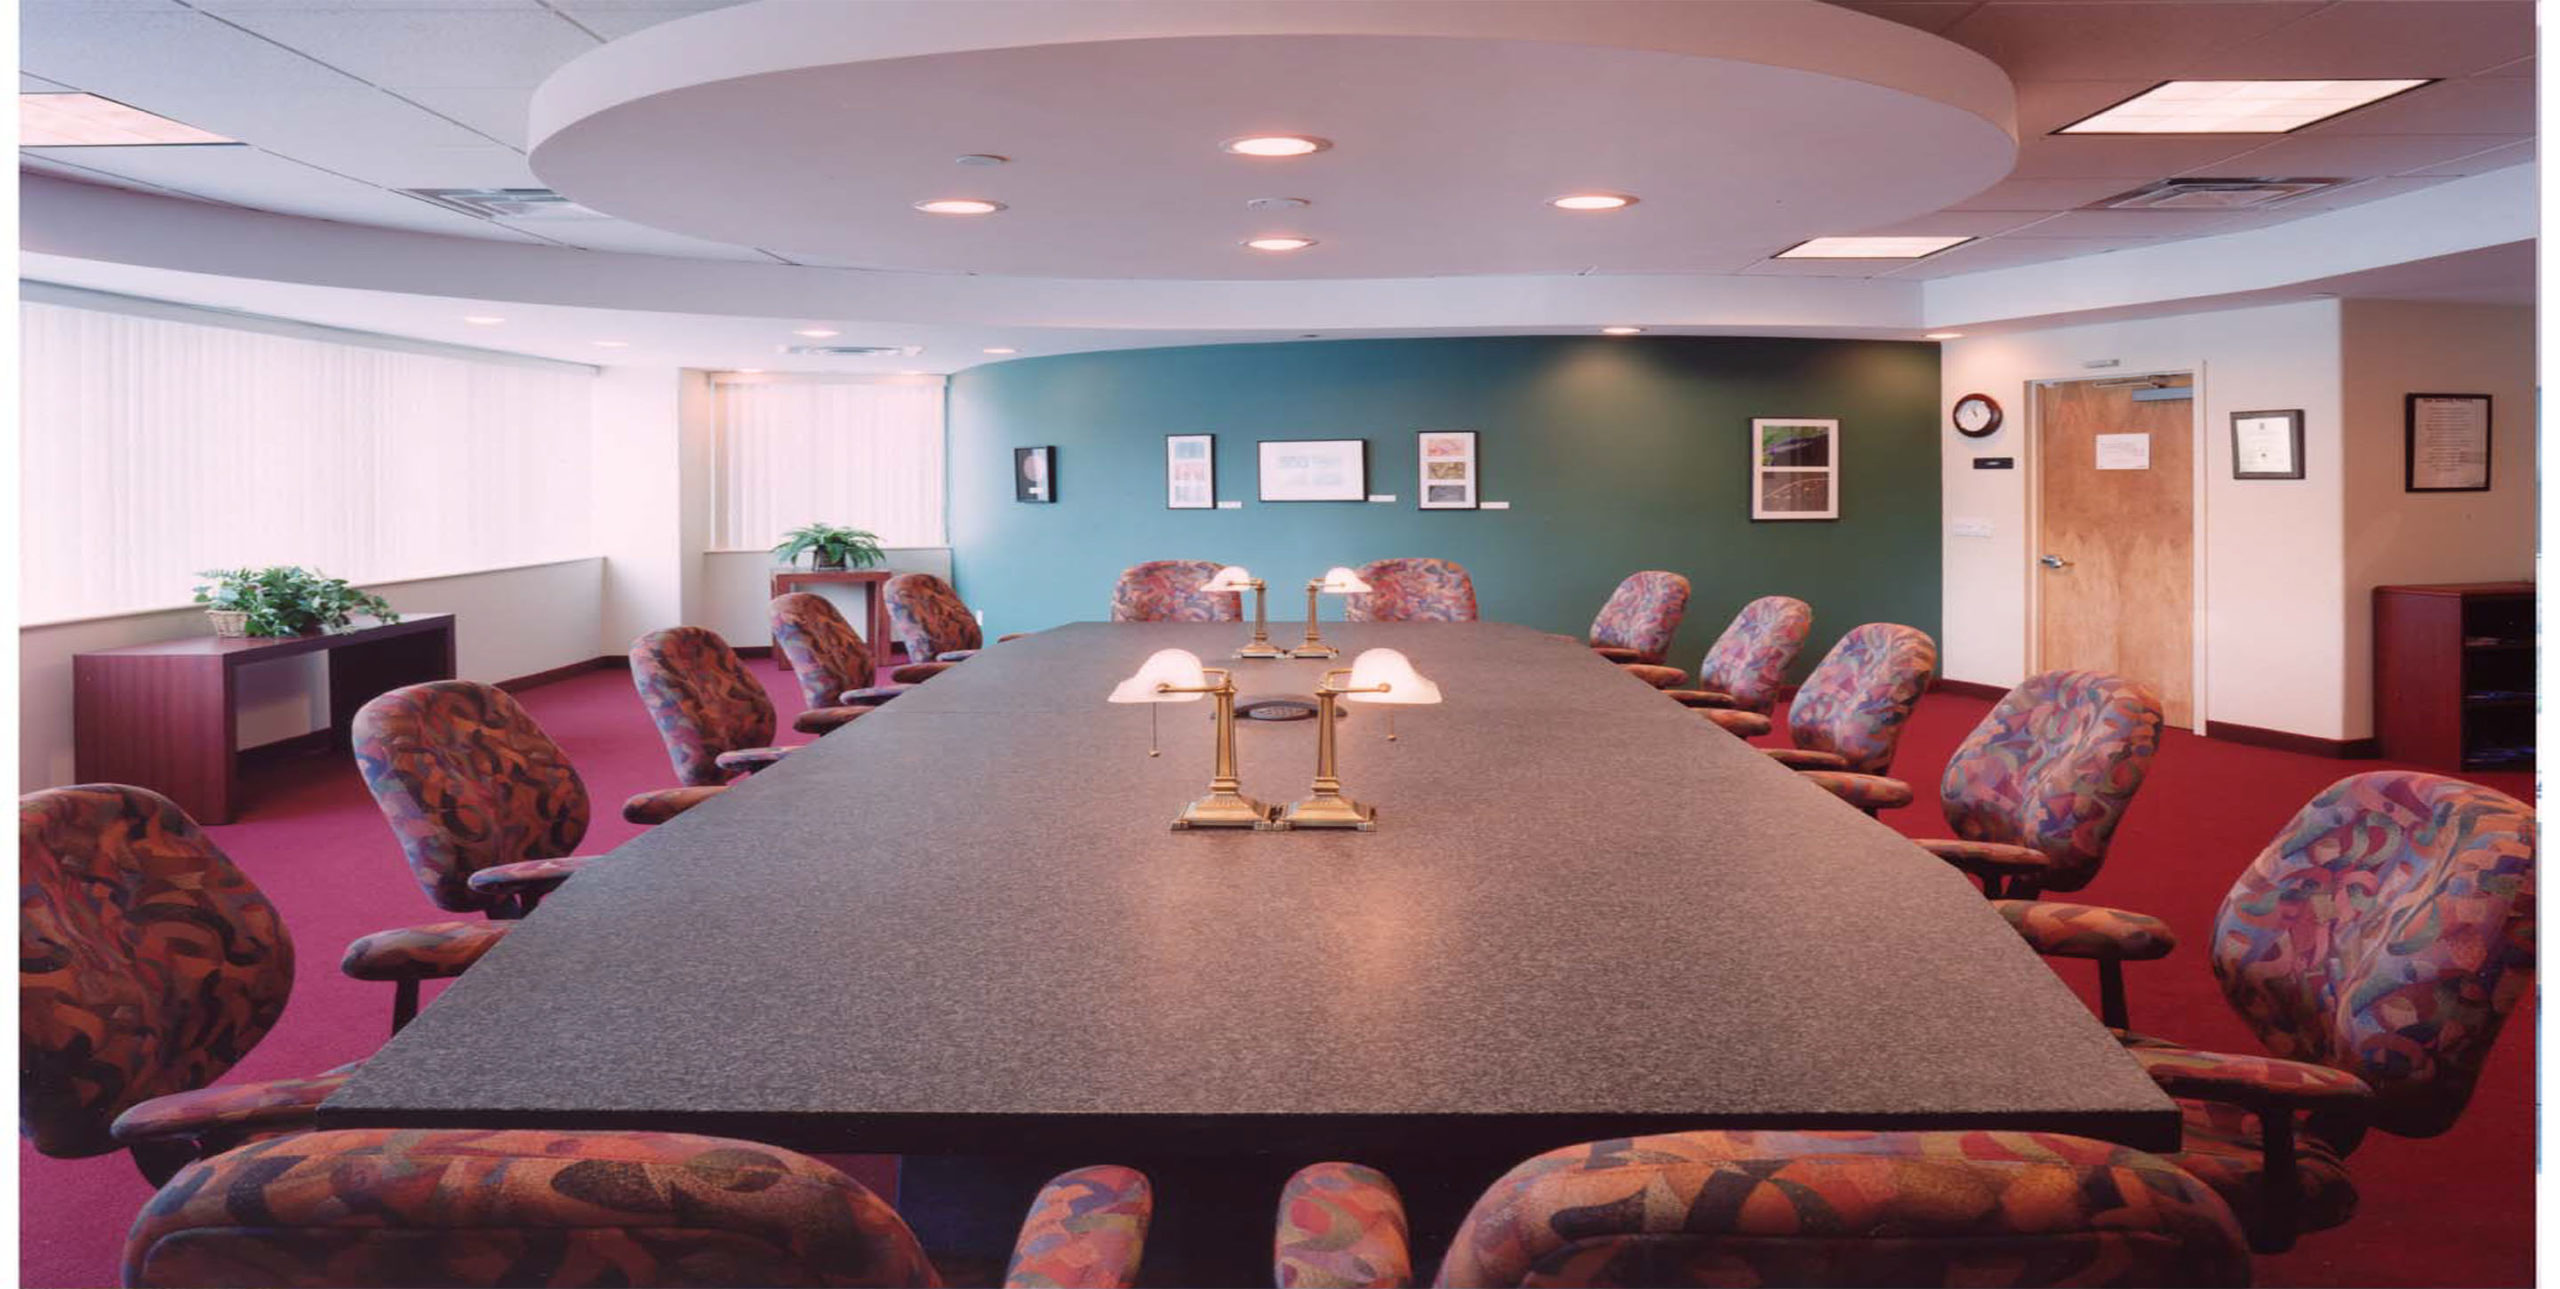 Conference room with 14 chairs